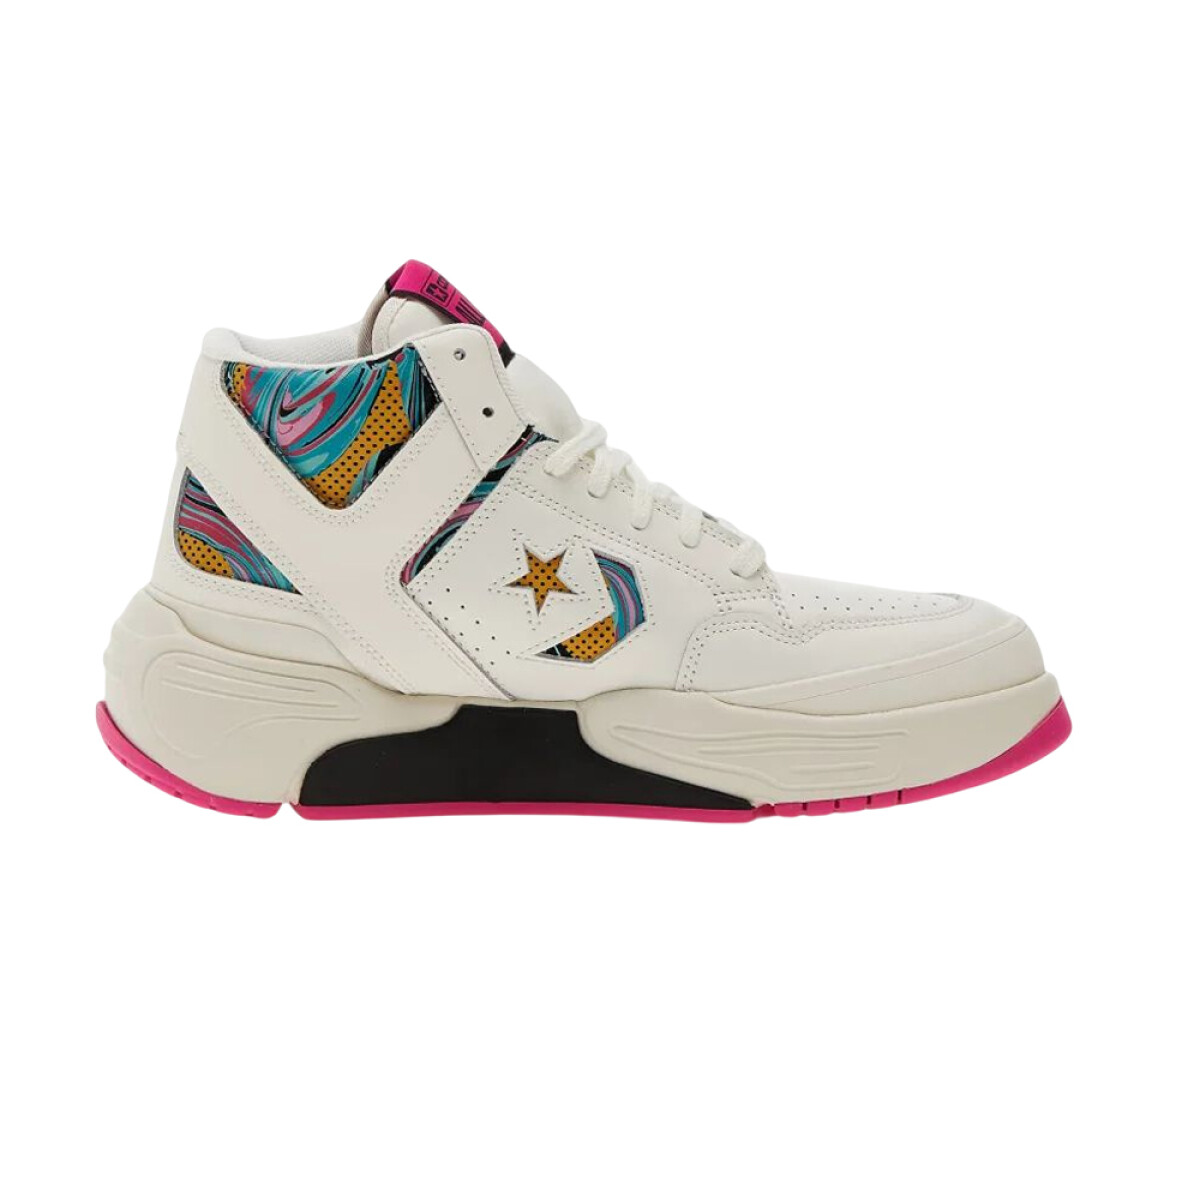 CONVERSE WEAPON CX MID - WHITE/PINK 